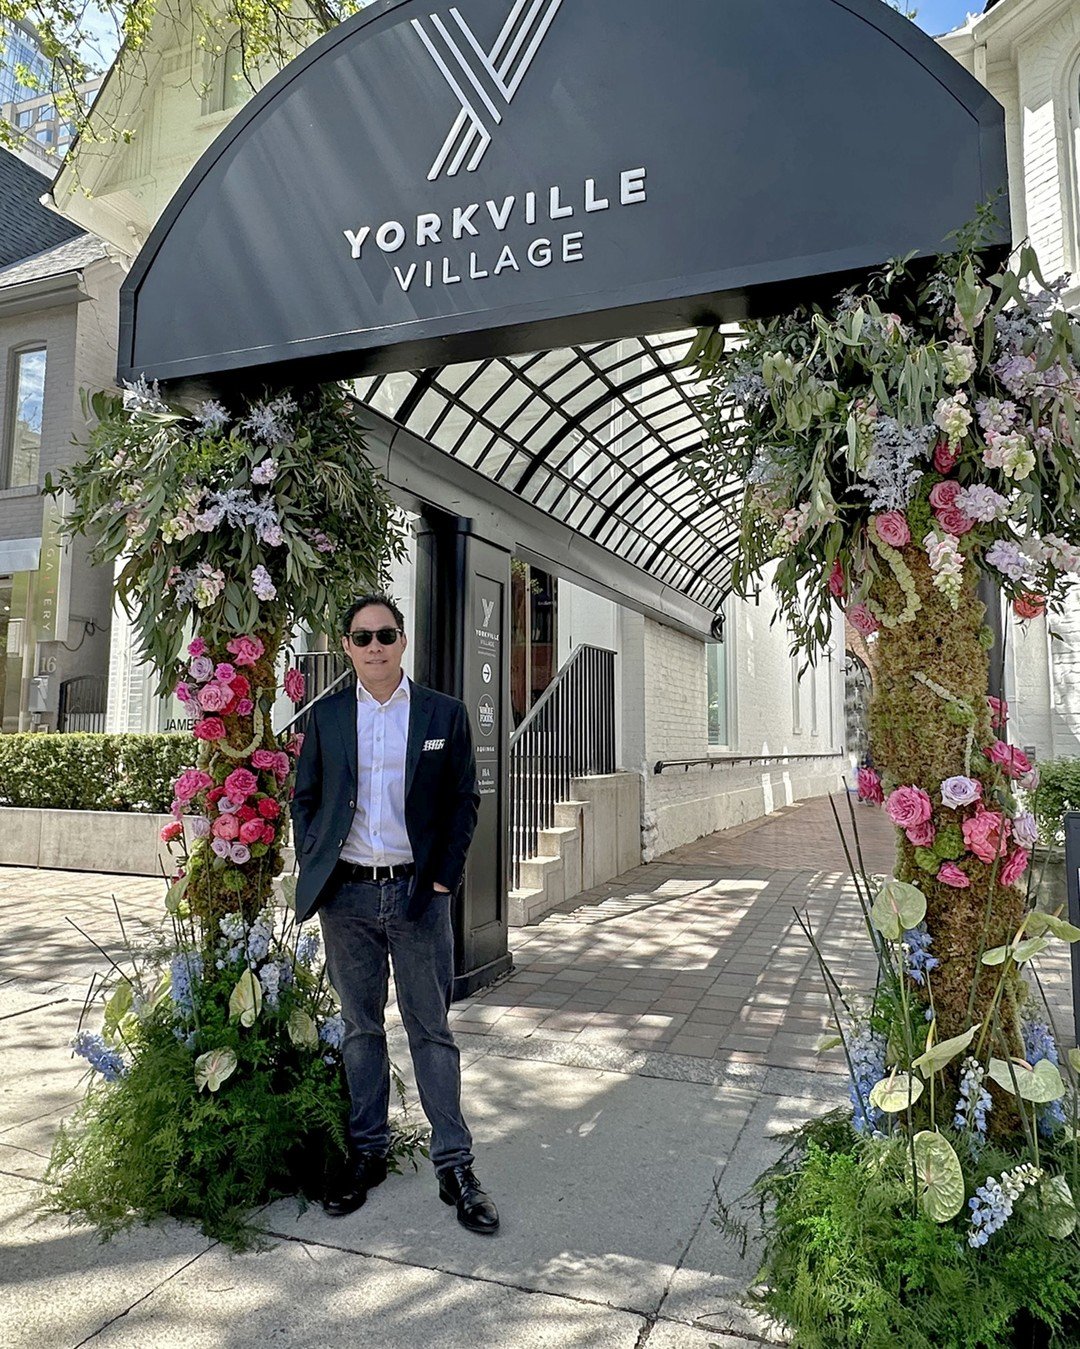 Fleurs de Villes ARTISTE is on now, until May 12th. The fresh floral celebration is back in the Bloor-Yorkville area of Toronto for its 100th show! Enjoy the sensational homage to art and artists, of contemporary and classical disciplines. Experience